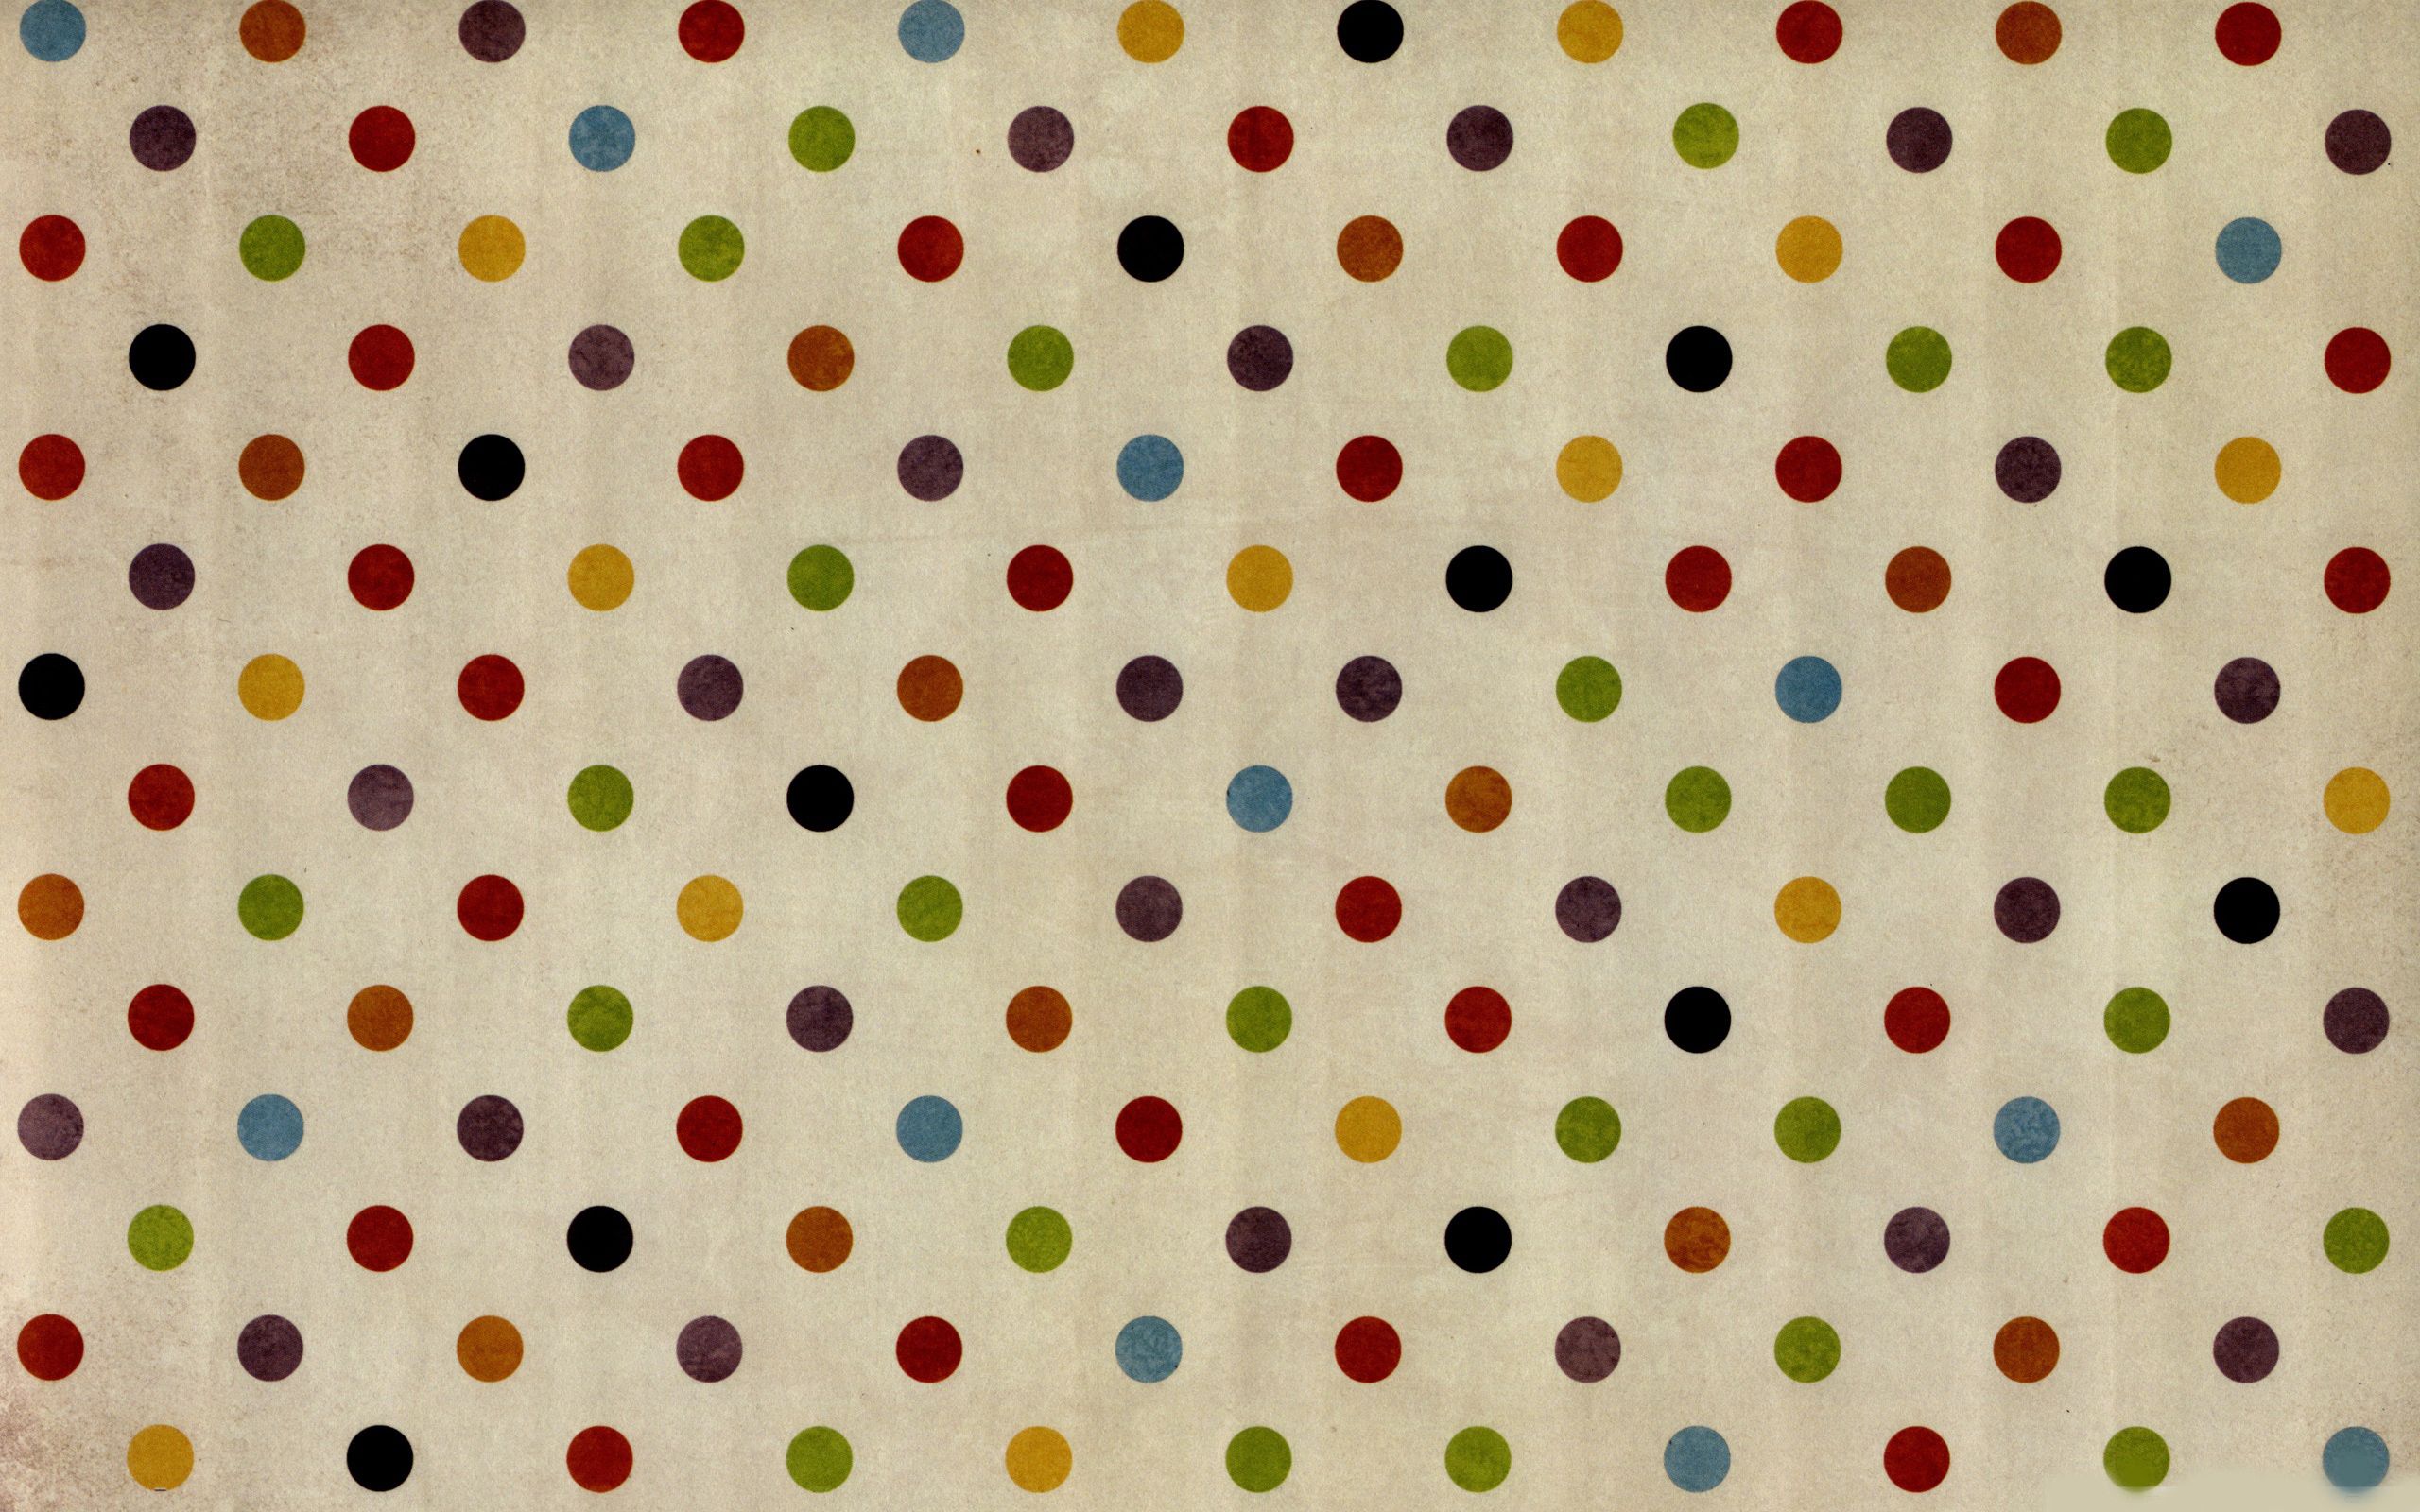 motley, textures, texture, circles, multicolored, surface High Definition image